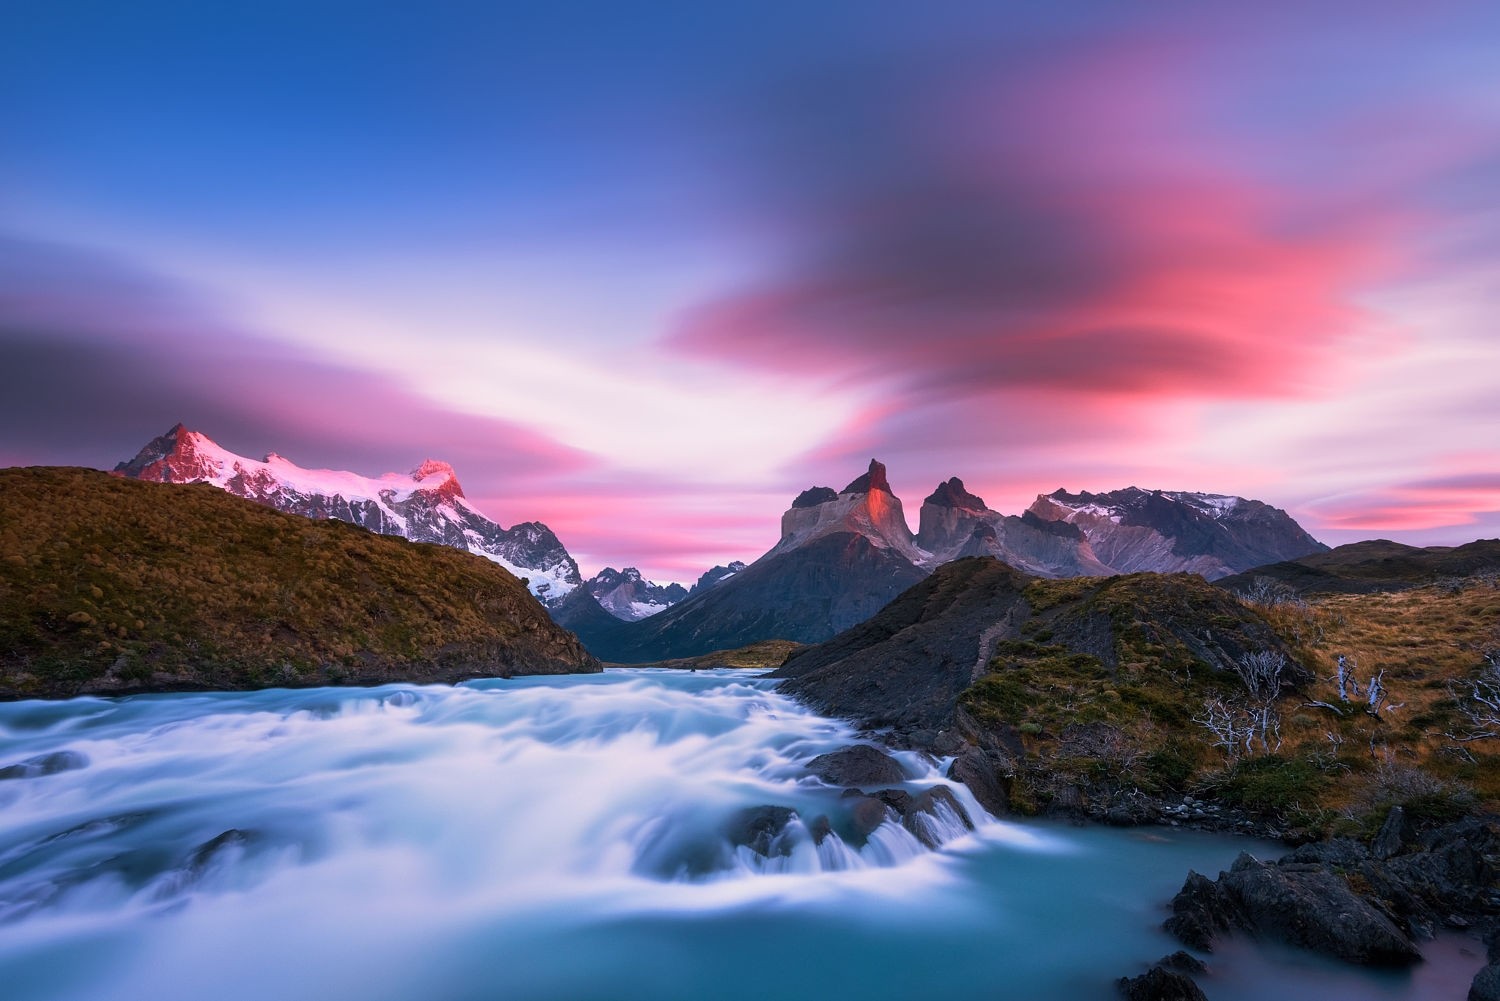 photography, Nature, Landscape, Morning, Sunlight, River, Mountains, Snowy peak, Clouds, Torres del paine national park, Patagonia, Chile Wallpaper